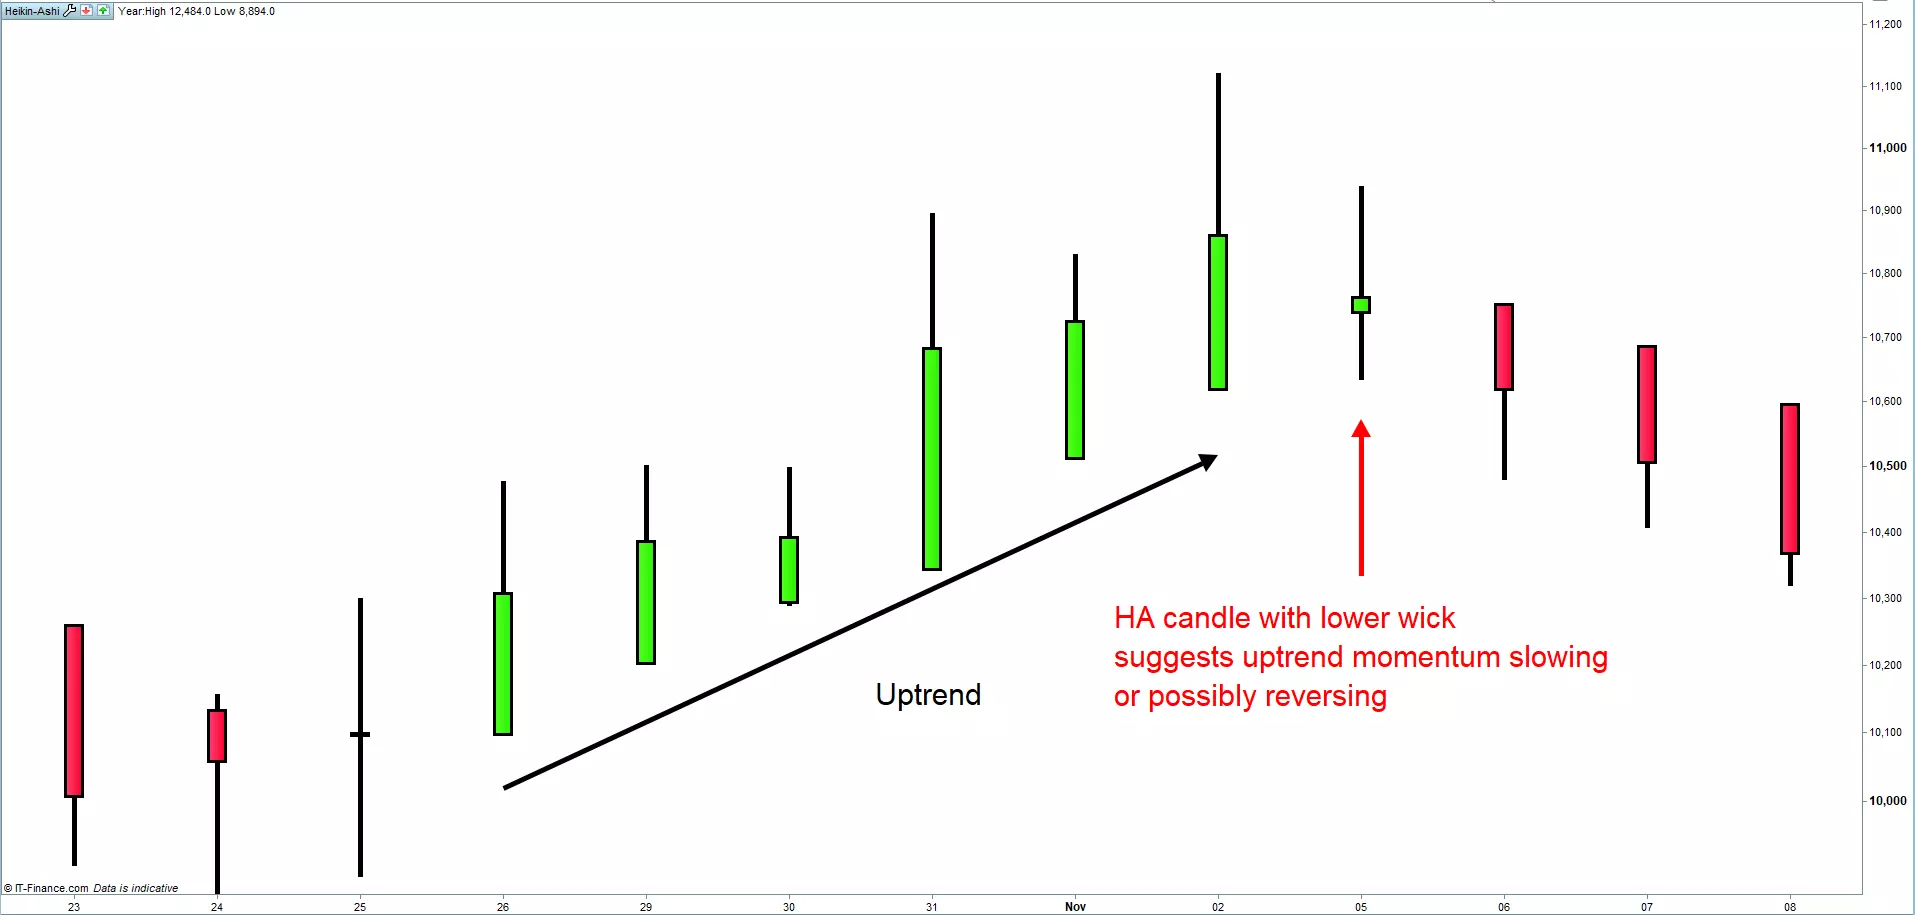 Uptrend with lower and no lower wick